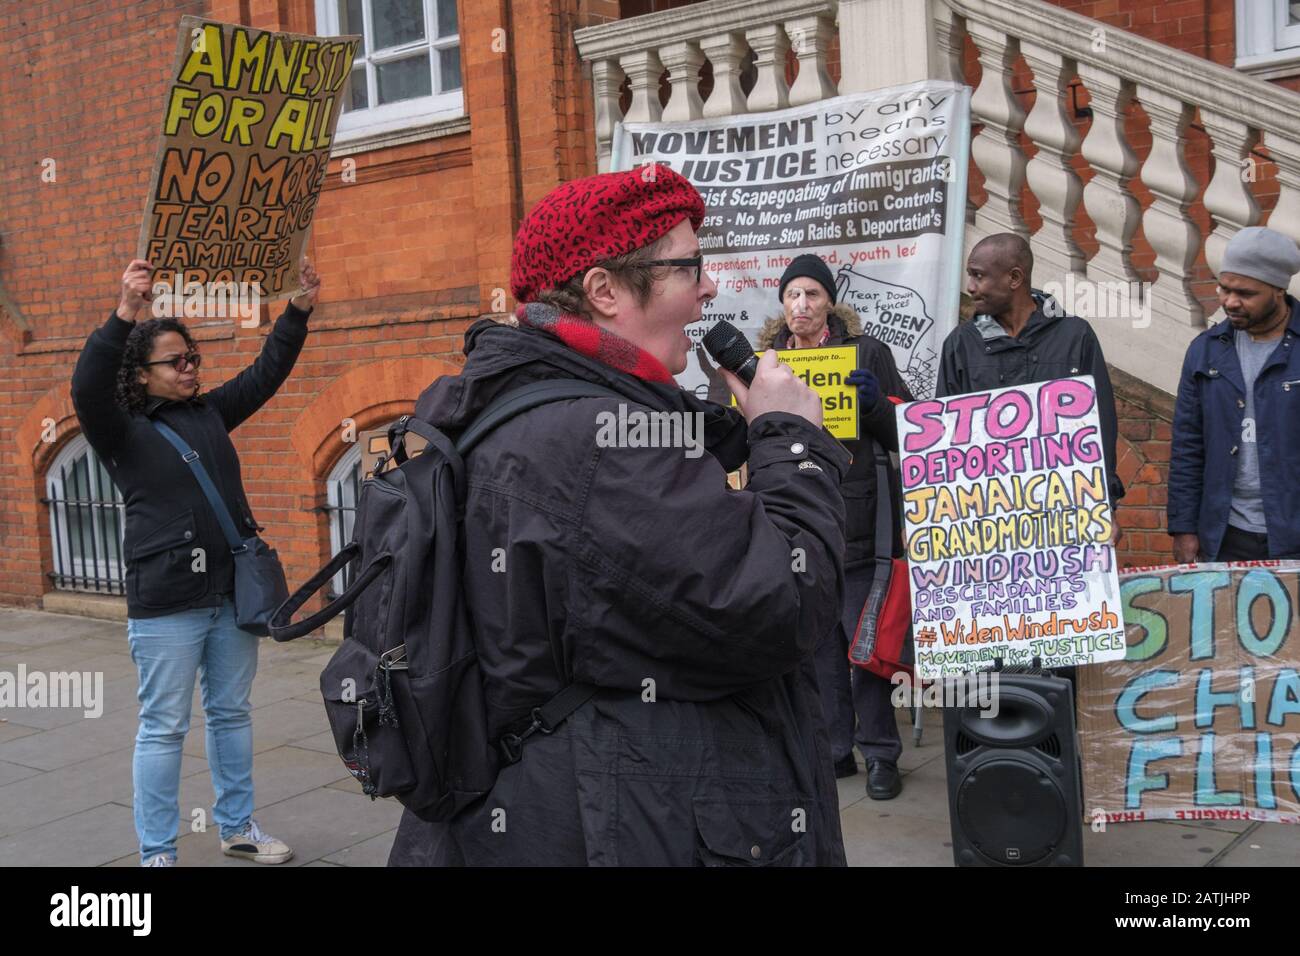 London, UK. 3rd February 2020. Karen Doyle of Movement for Justice speaks at a protest outside the Jamaican High Commission demanding Jamaica end accepting Britain's racist deportation flights. They say these are a modern equivalent of slave ships, with deportees manacled between guards for the flight. Those seized include many from Windrush families who have lived here most of their lives but are unable to produce the exhaustive paperwork demanded and seldom have the chance to properly contest their case. Peter Marshall/Alamy Live News Stock Photo